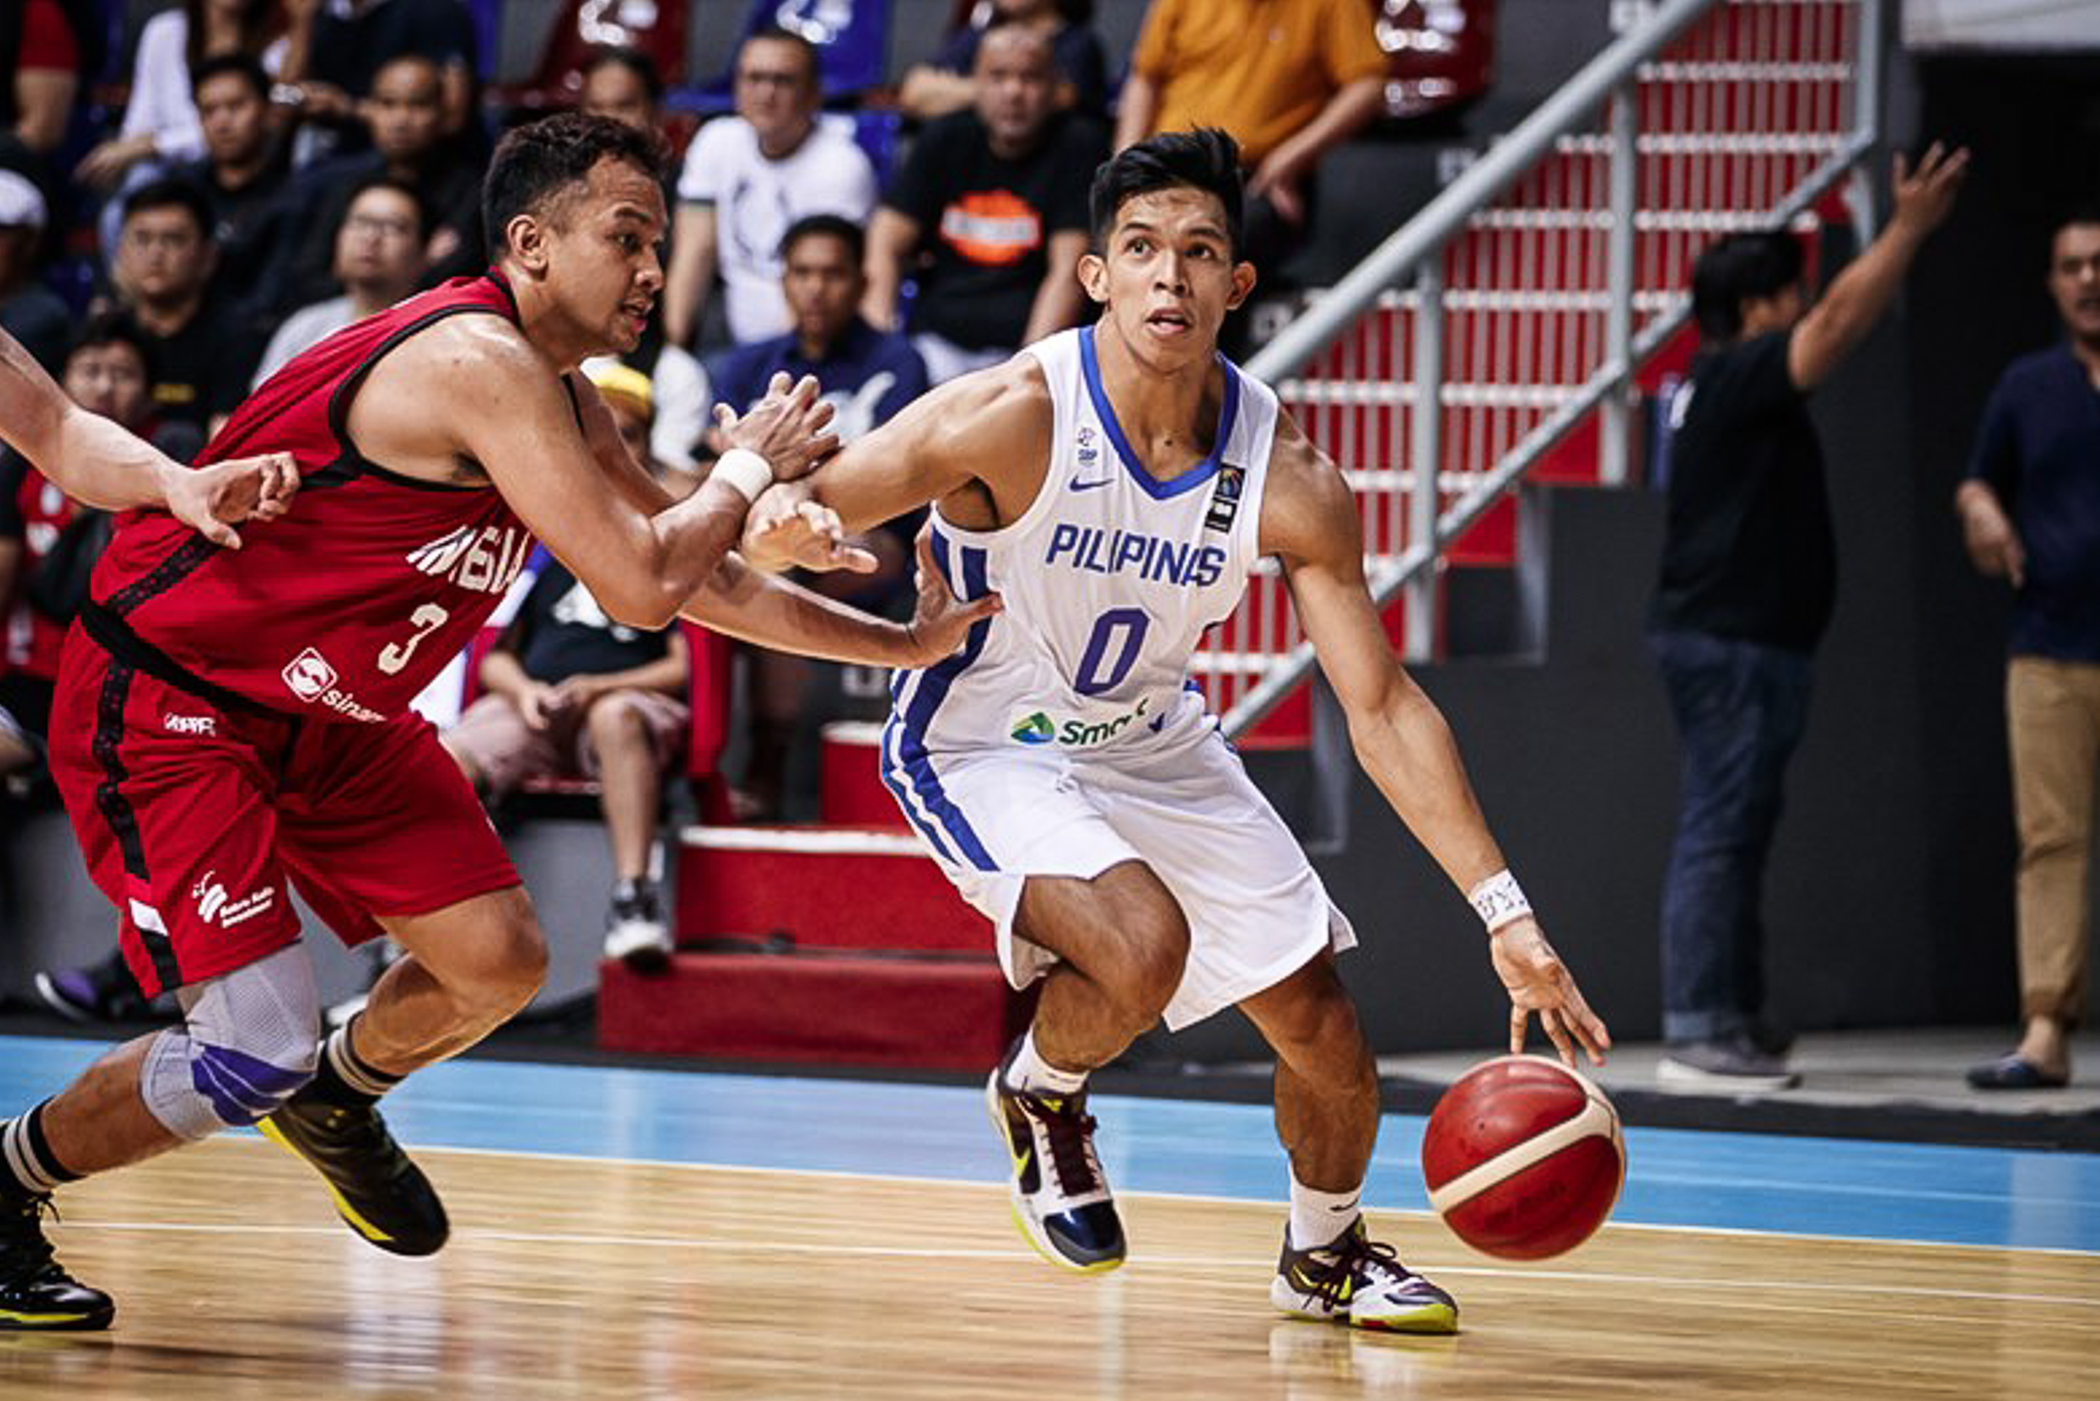 Gilas Pilipinas routs Indonesia to open FIBA Asia Cup